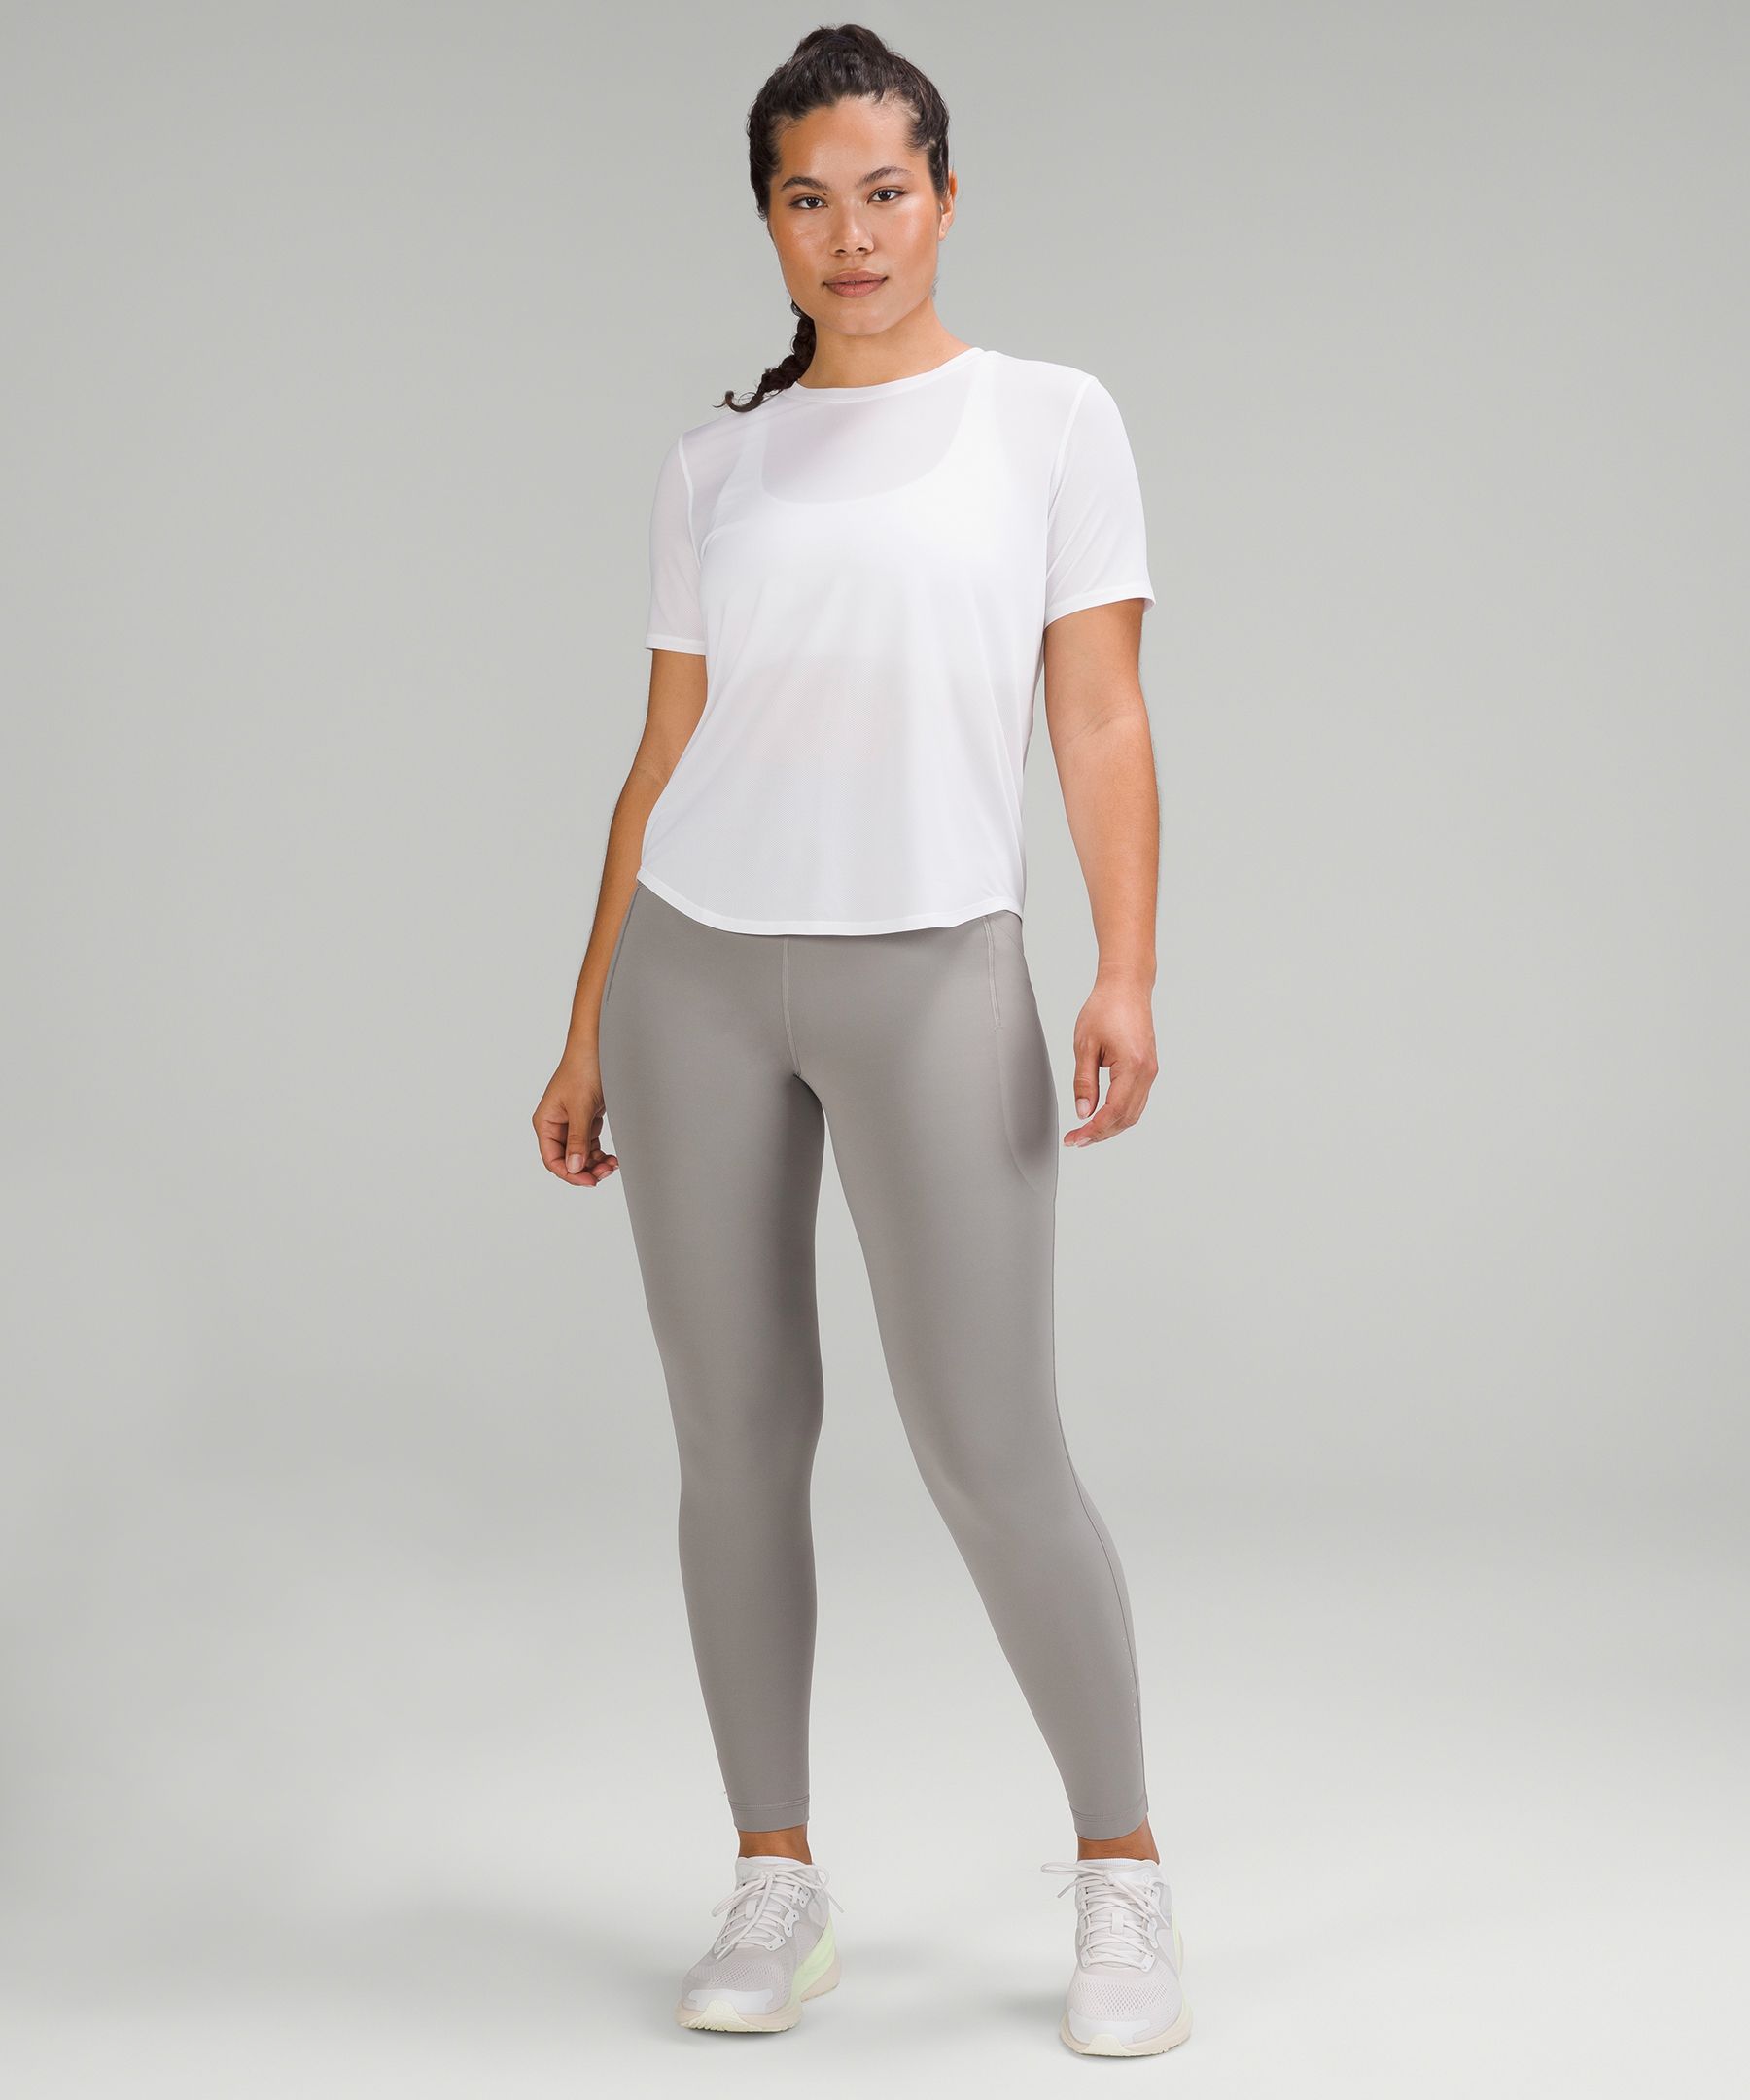 Lululemon athletica Swift Speed High-Rise Tight 28 *Brushed Luxtreme, Women's  Leggings/Tights